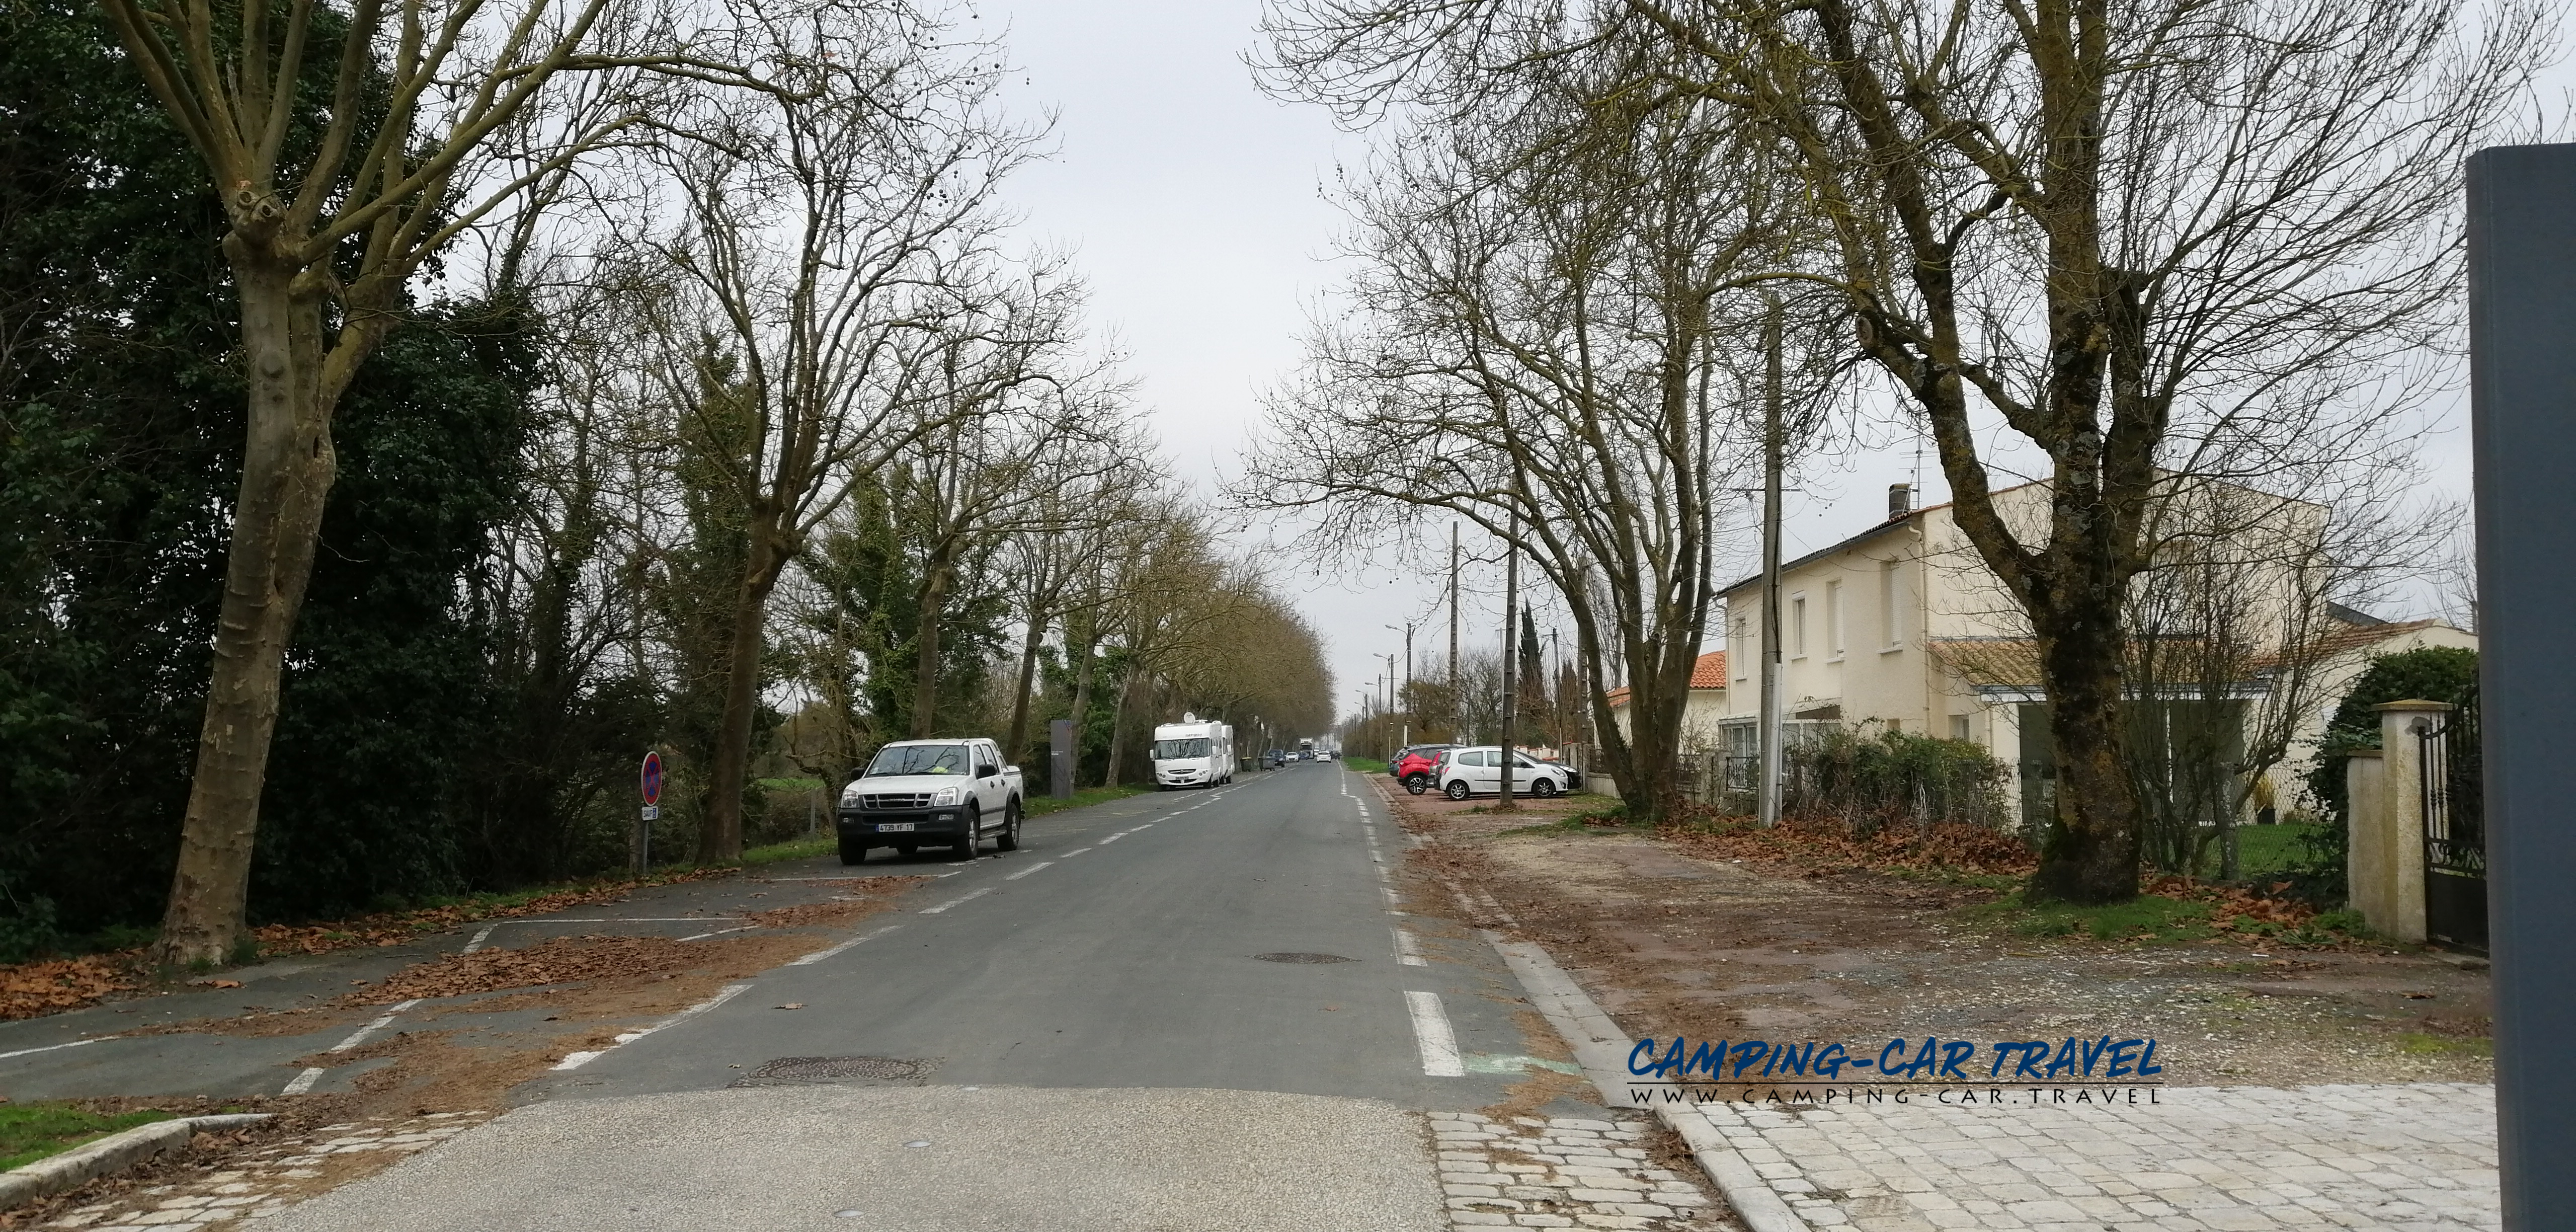 aire services camping car Rochefort Charente-Maritime